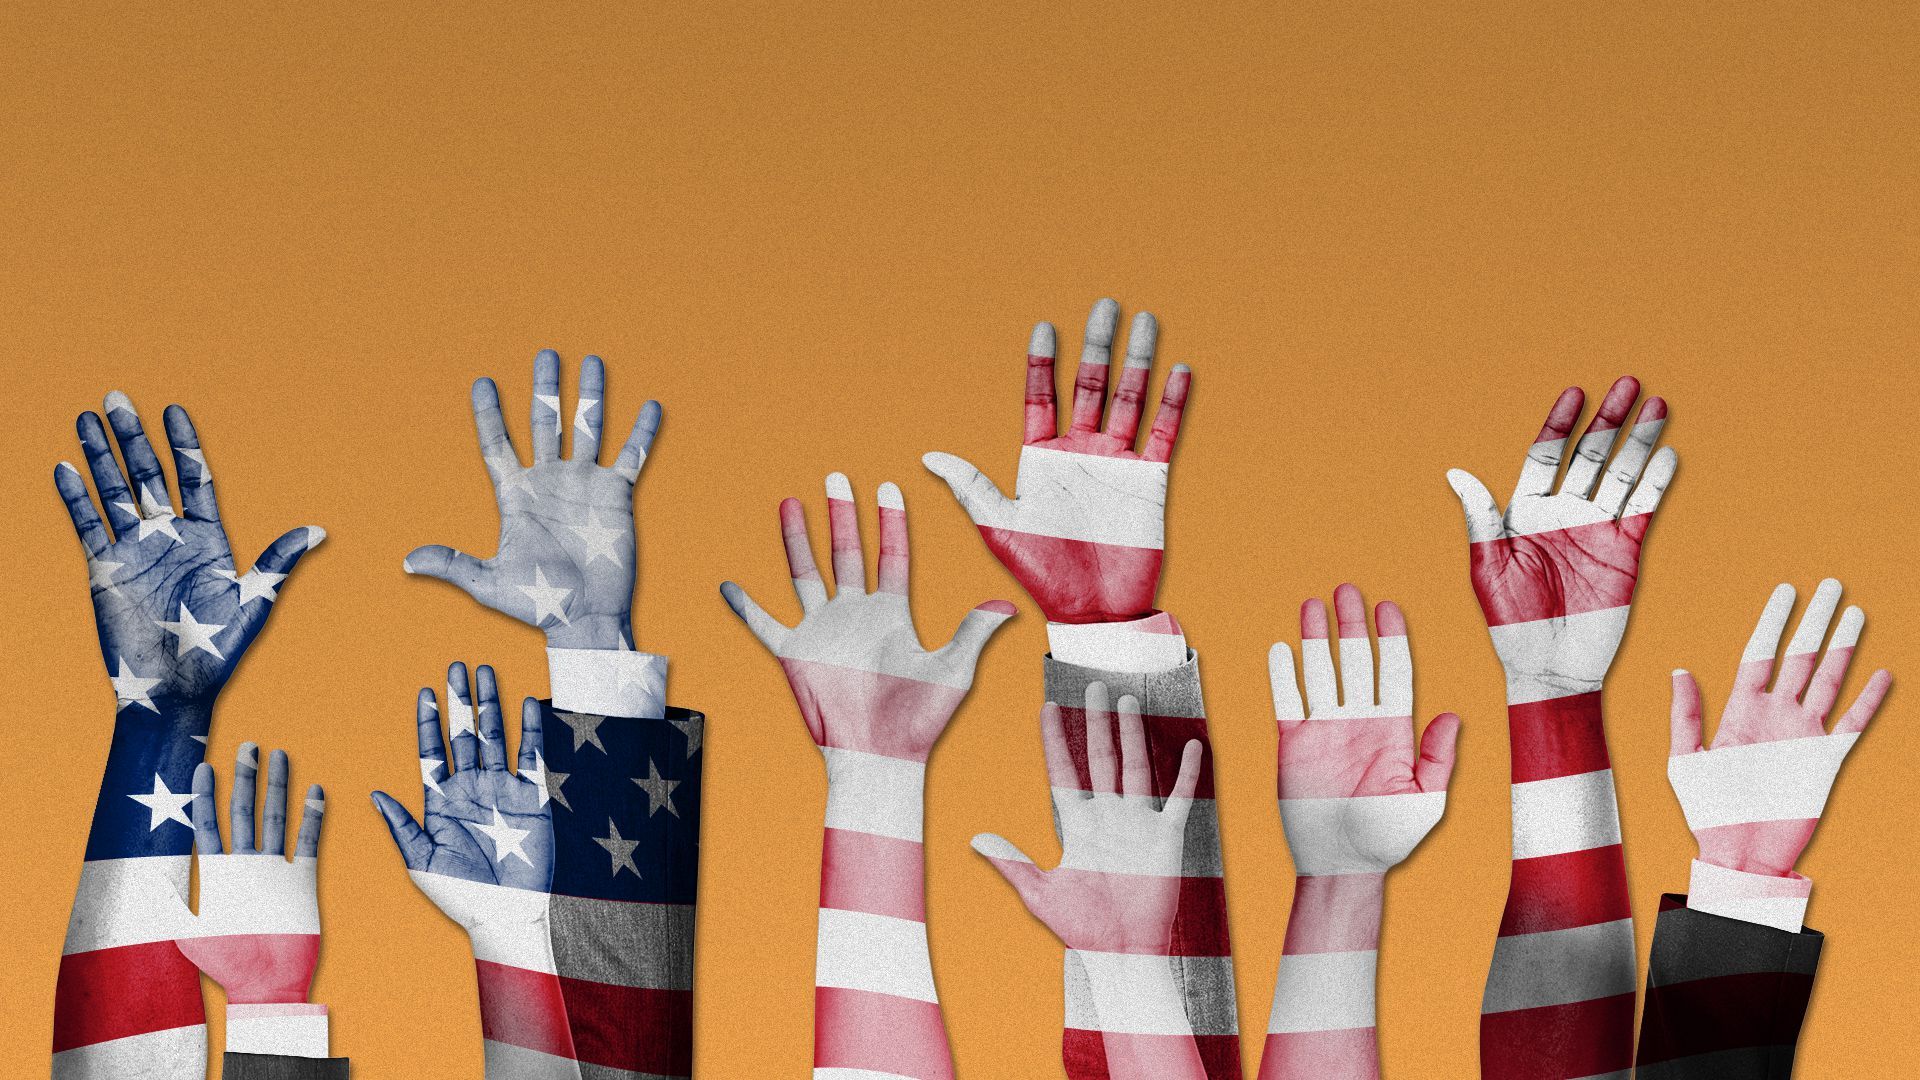 Illustration of a pattern of the US flag on a group of raised hands.